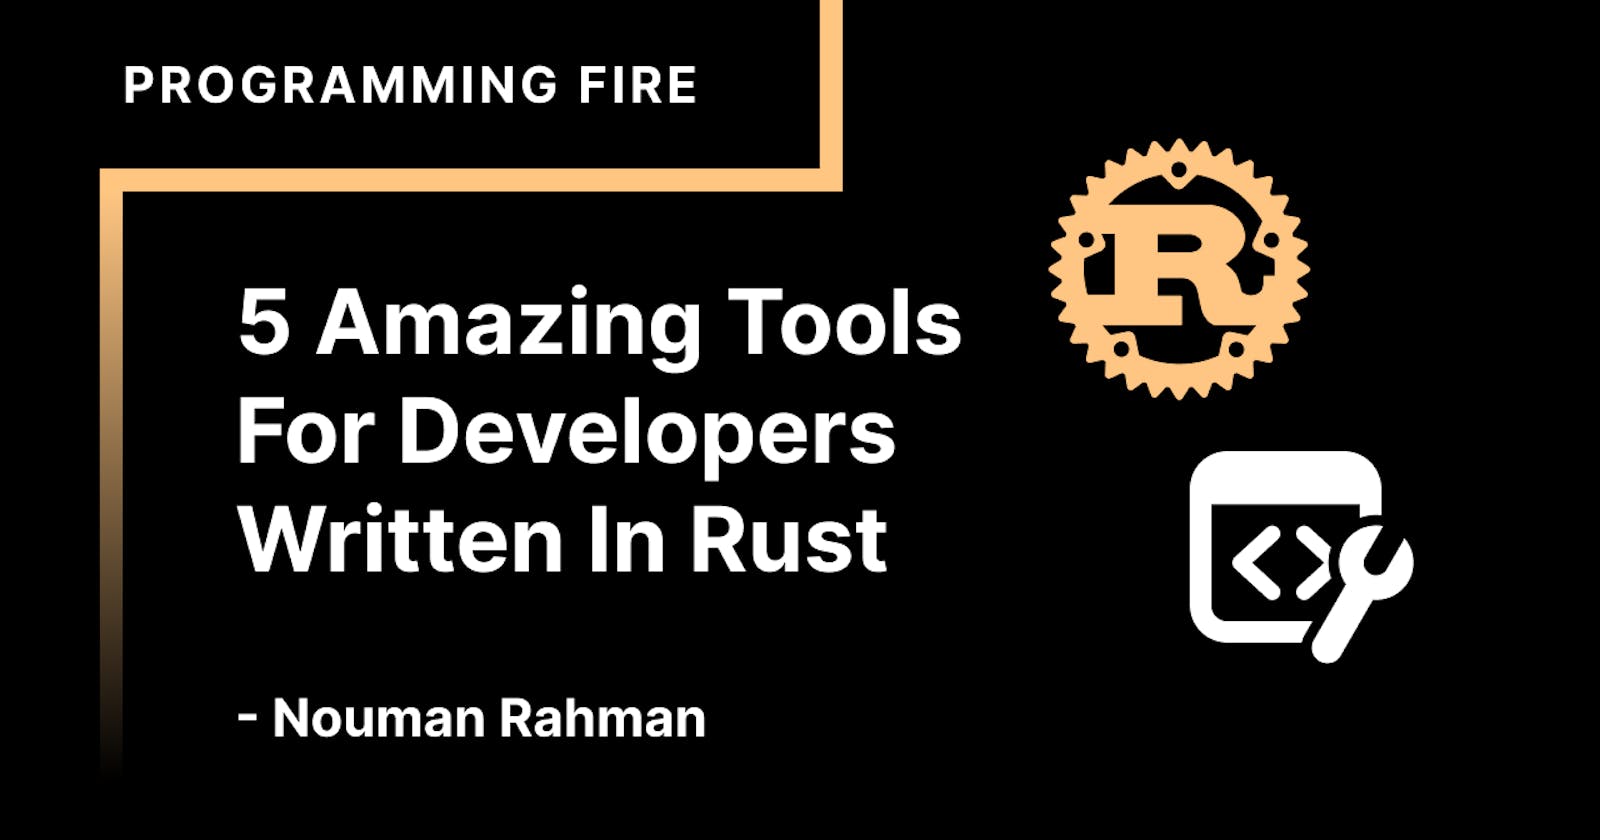 5 Amazing Tools For Developers Written In Rust